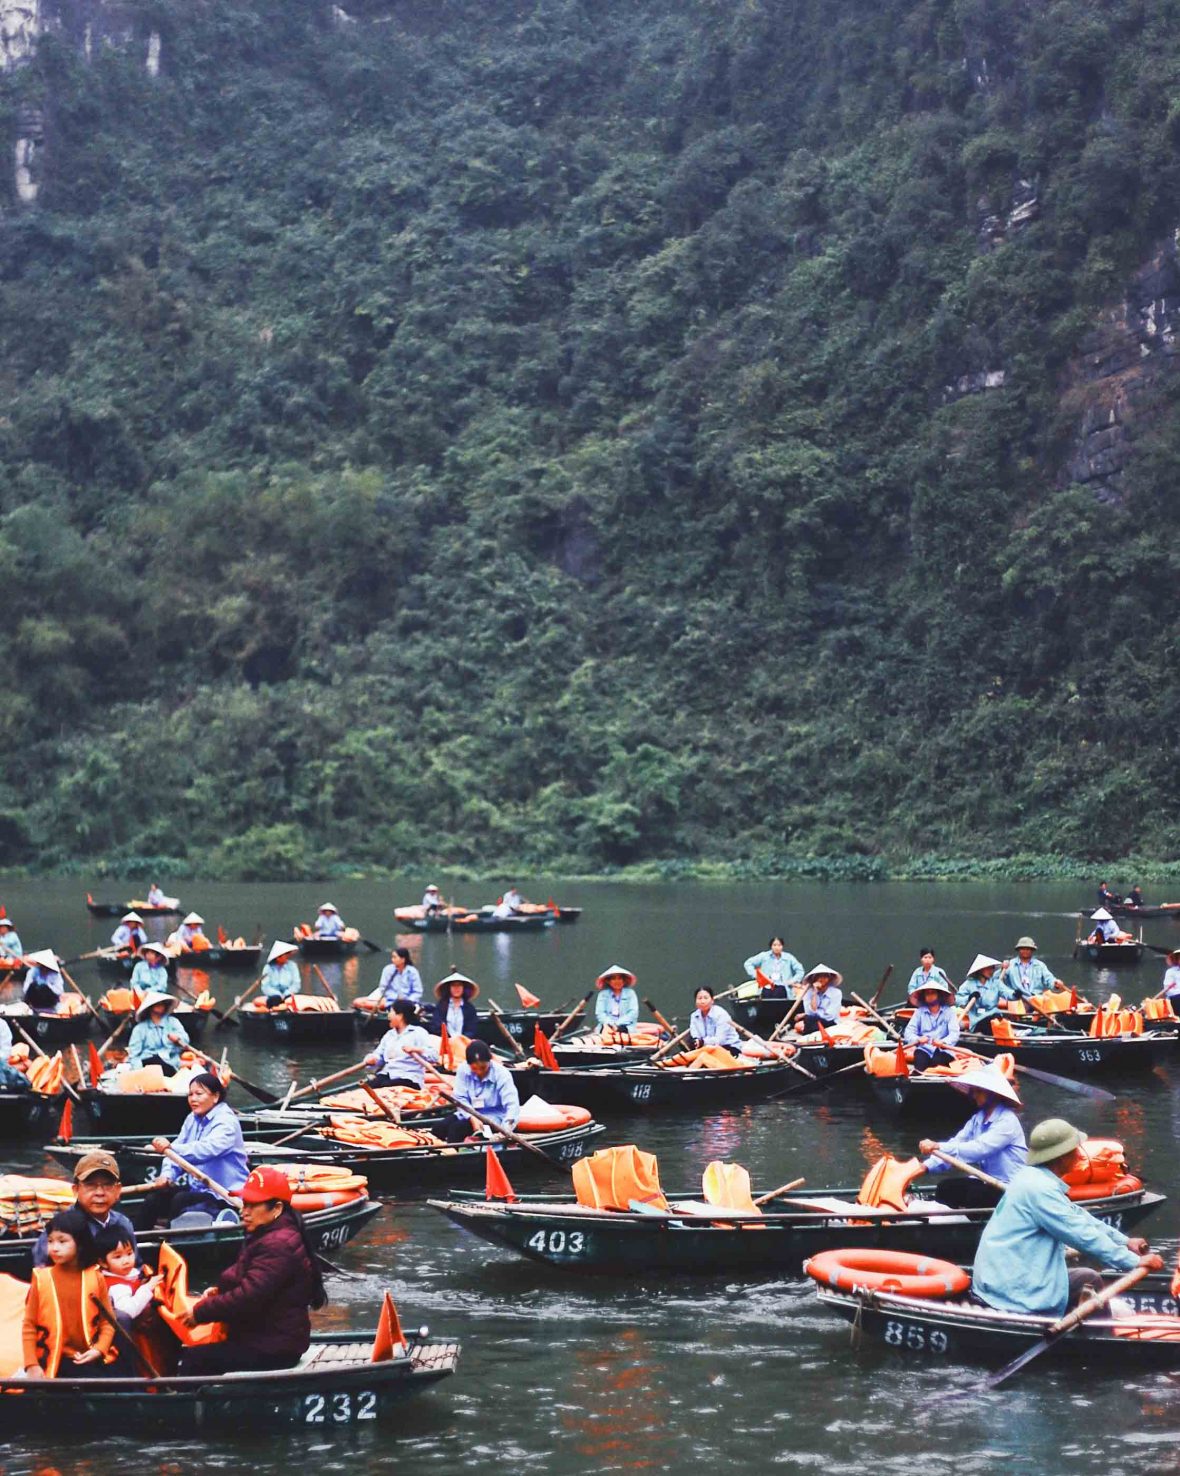 Local Vietnamese tour operators wait for tourists in small row boats in the water.